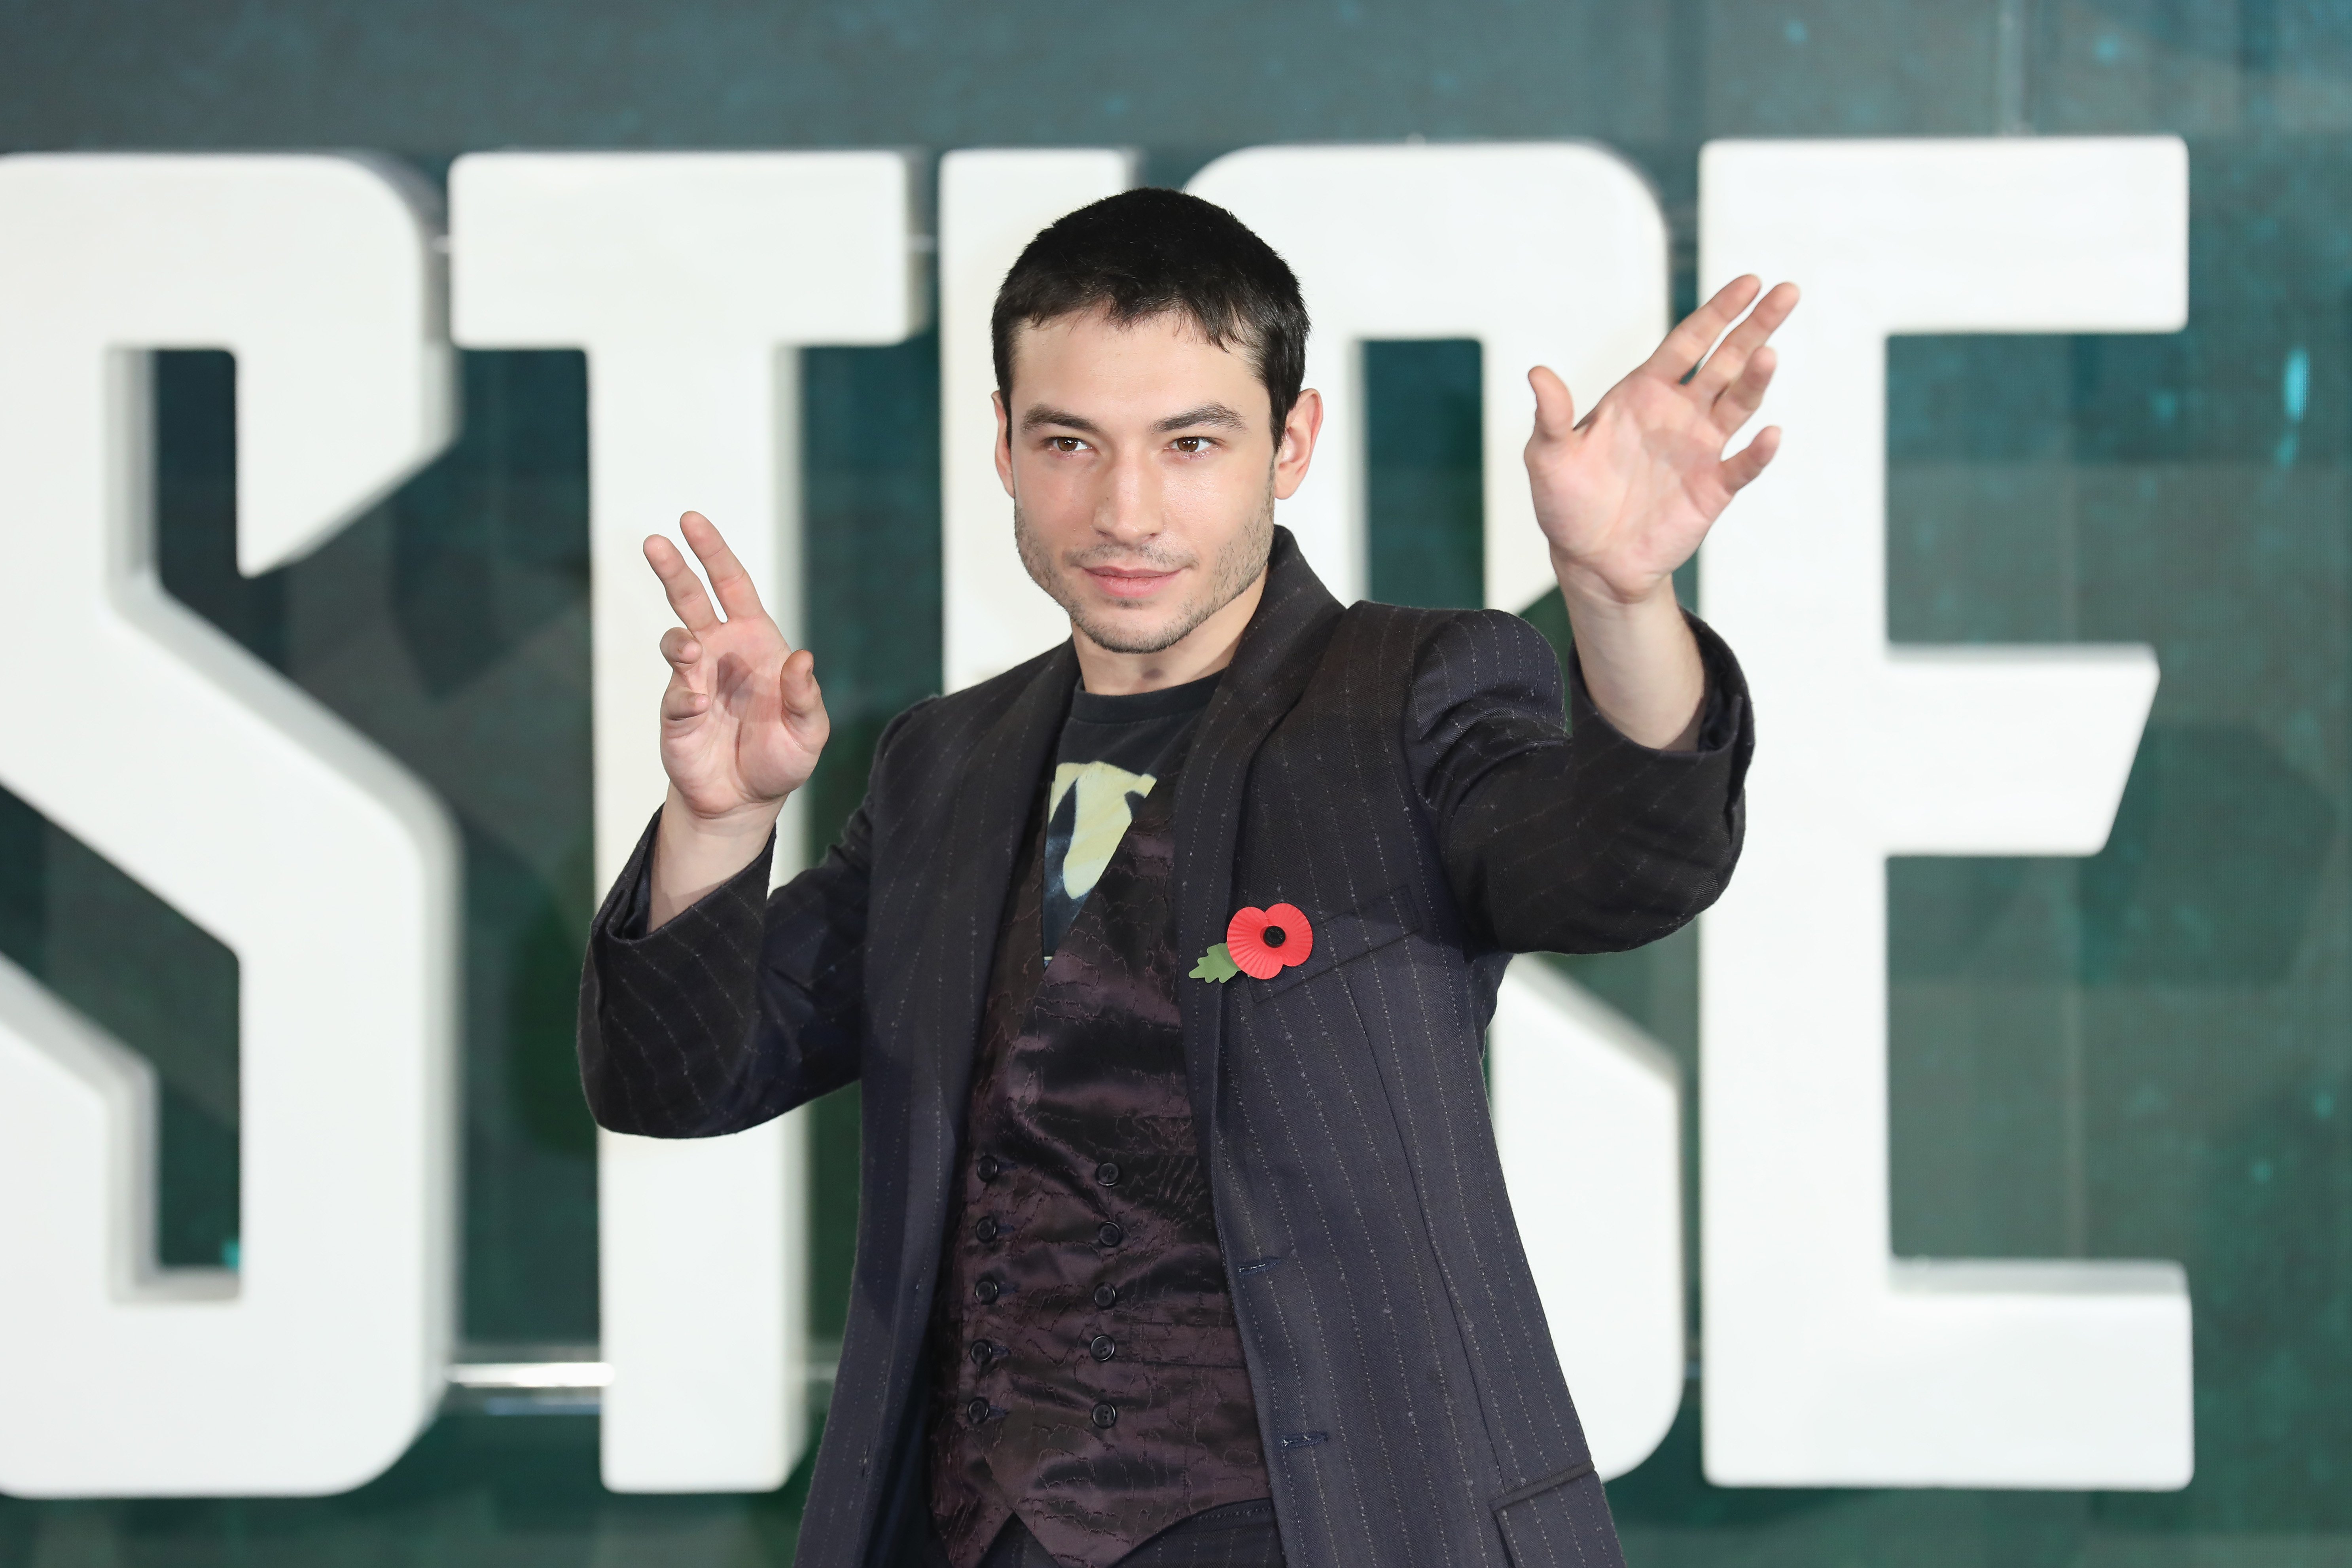 Ezra Miller attends the "Justice League" photocall at The College on November 4, 2017, in London, England. | Source: Getty Images